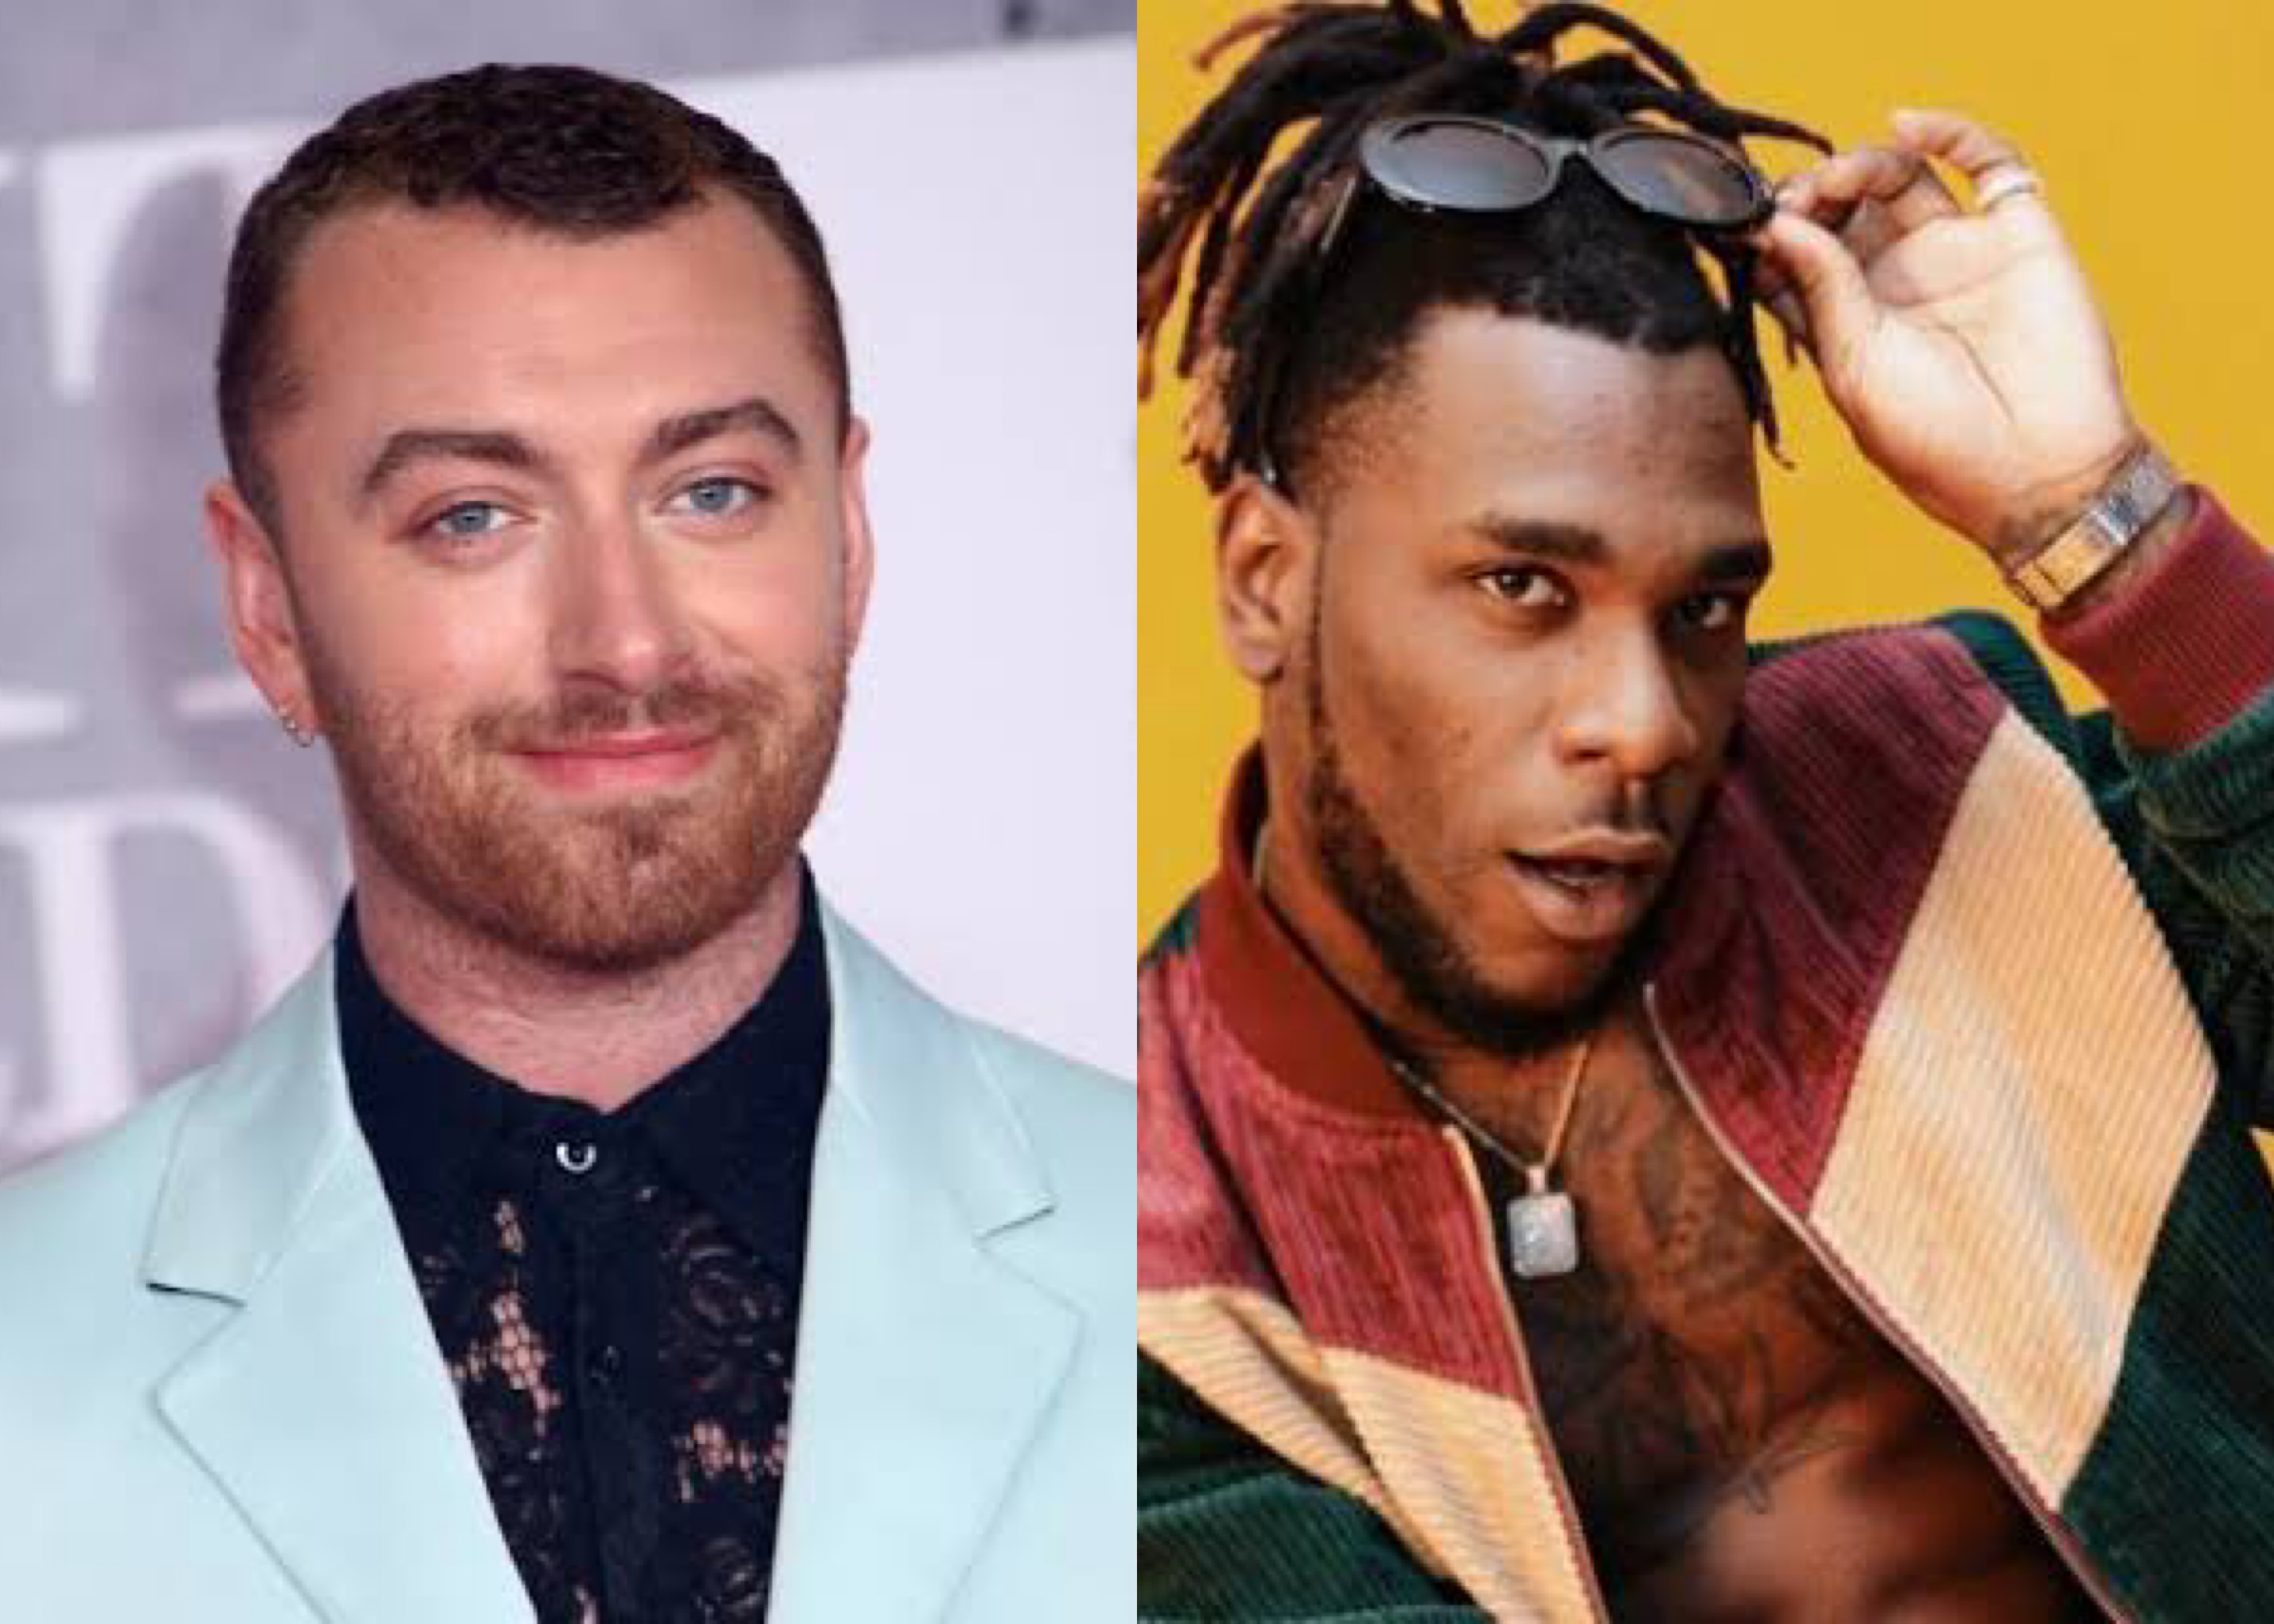 Sam Smith Features Burna Boy On New Single ‘My Oasis’ To Be Released On Thursday